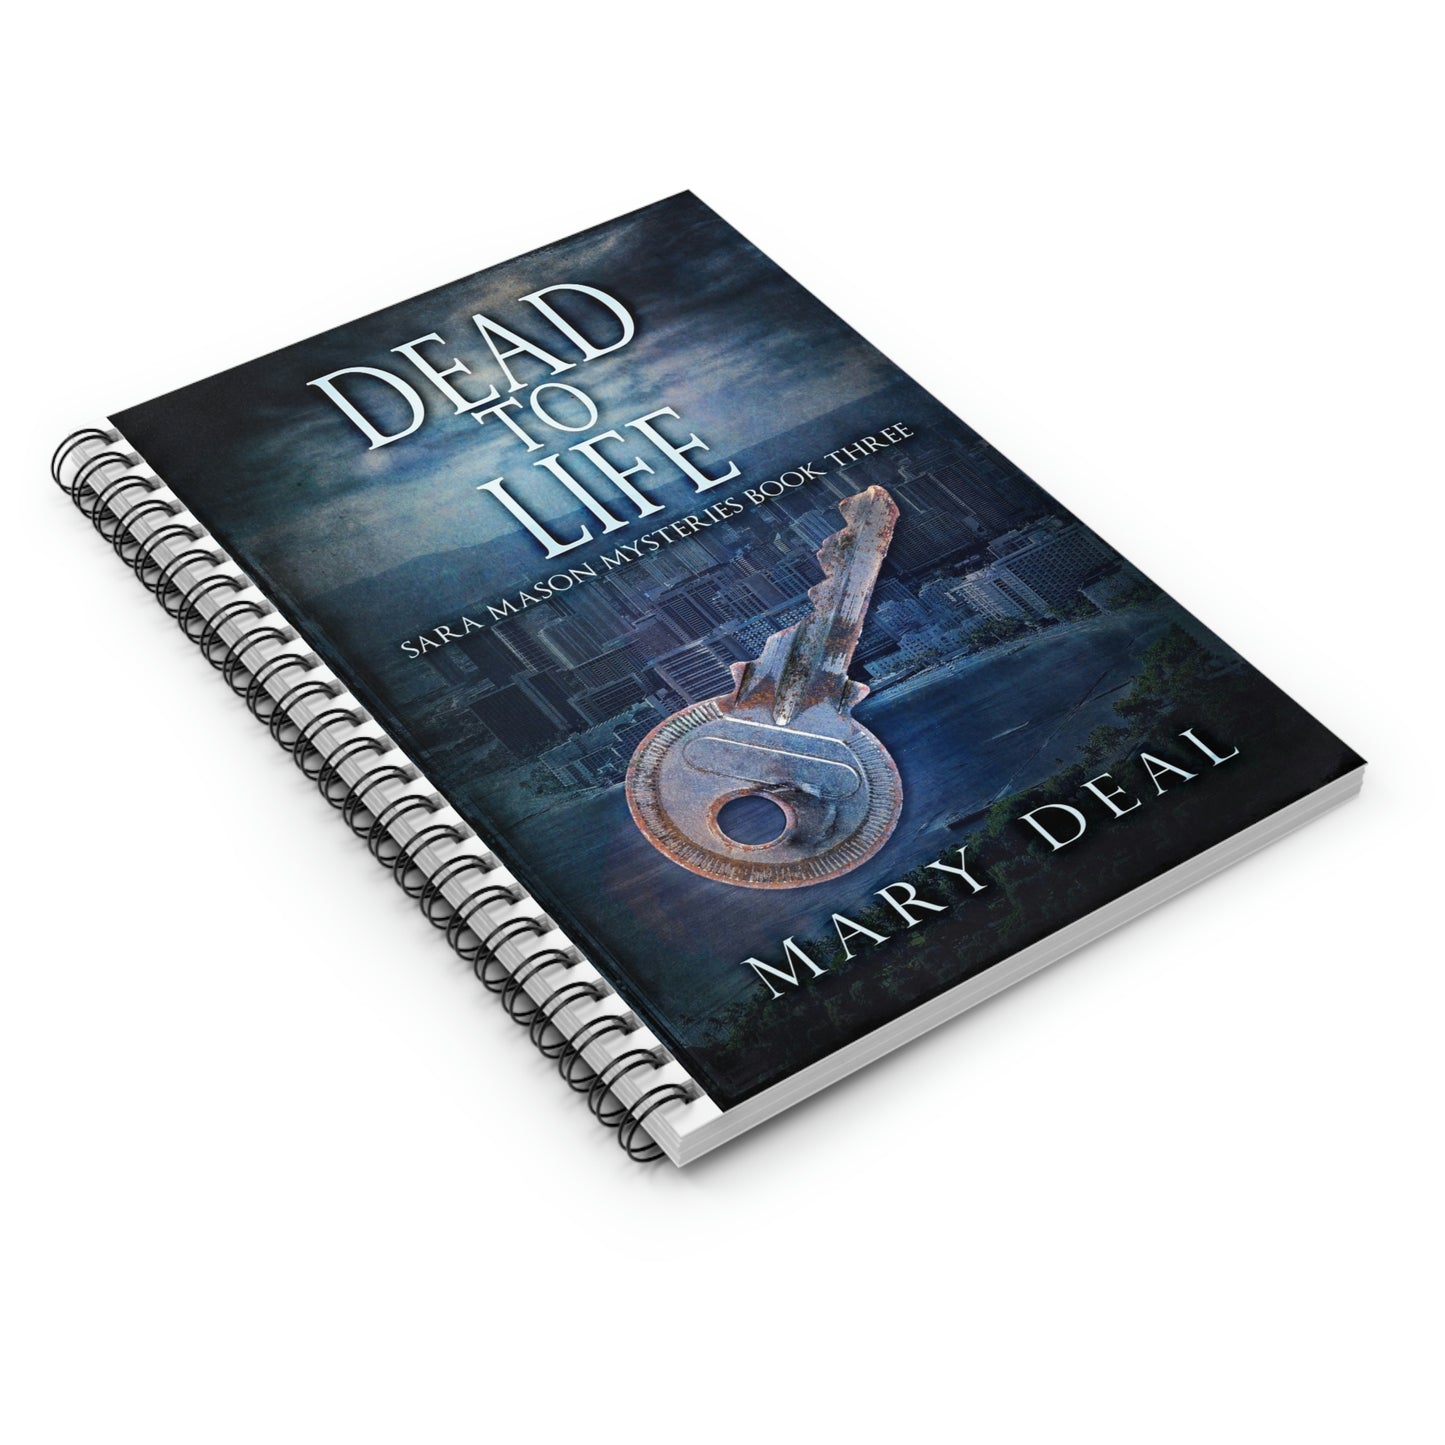 Dead To Life - Spiral Notebook